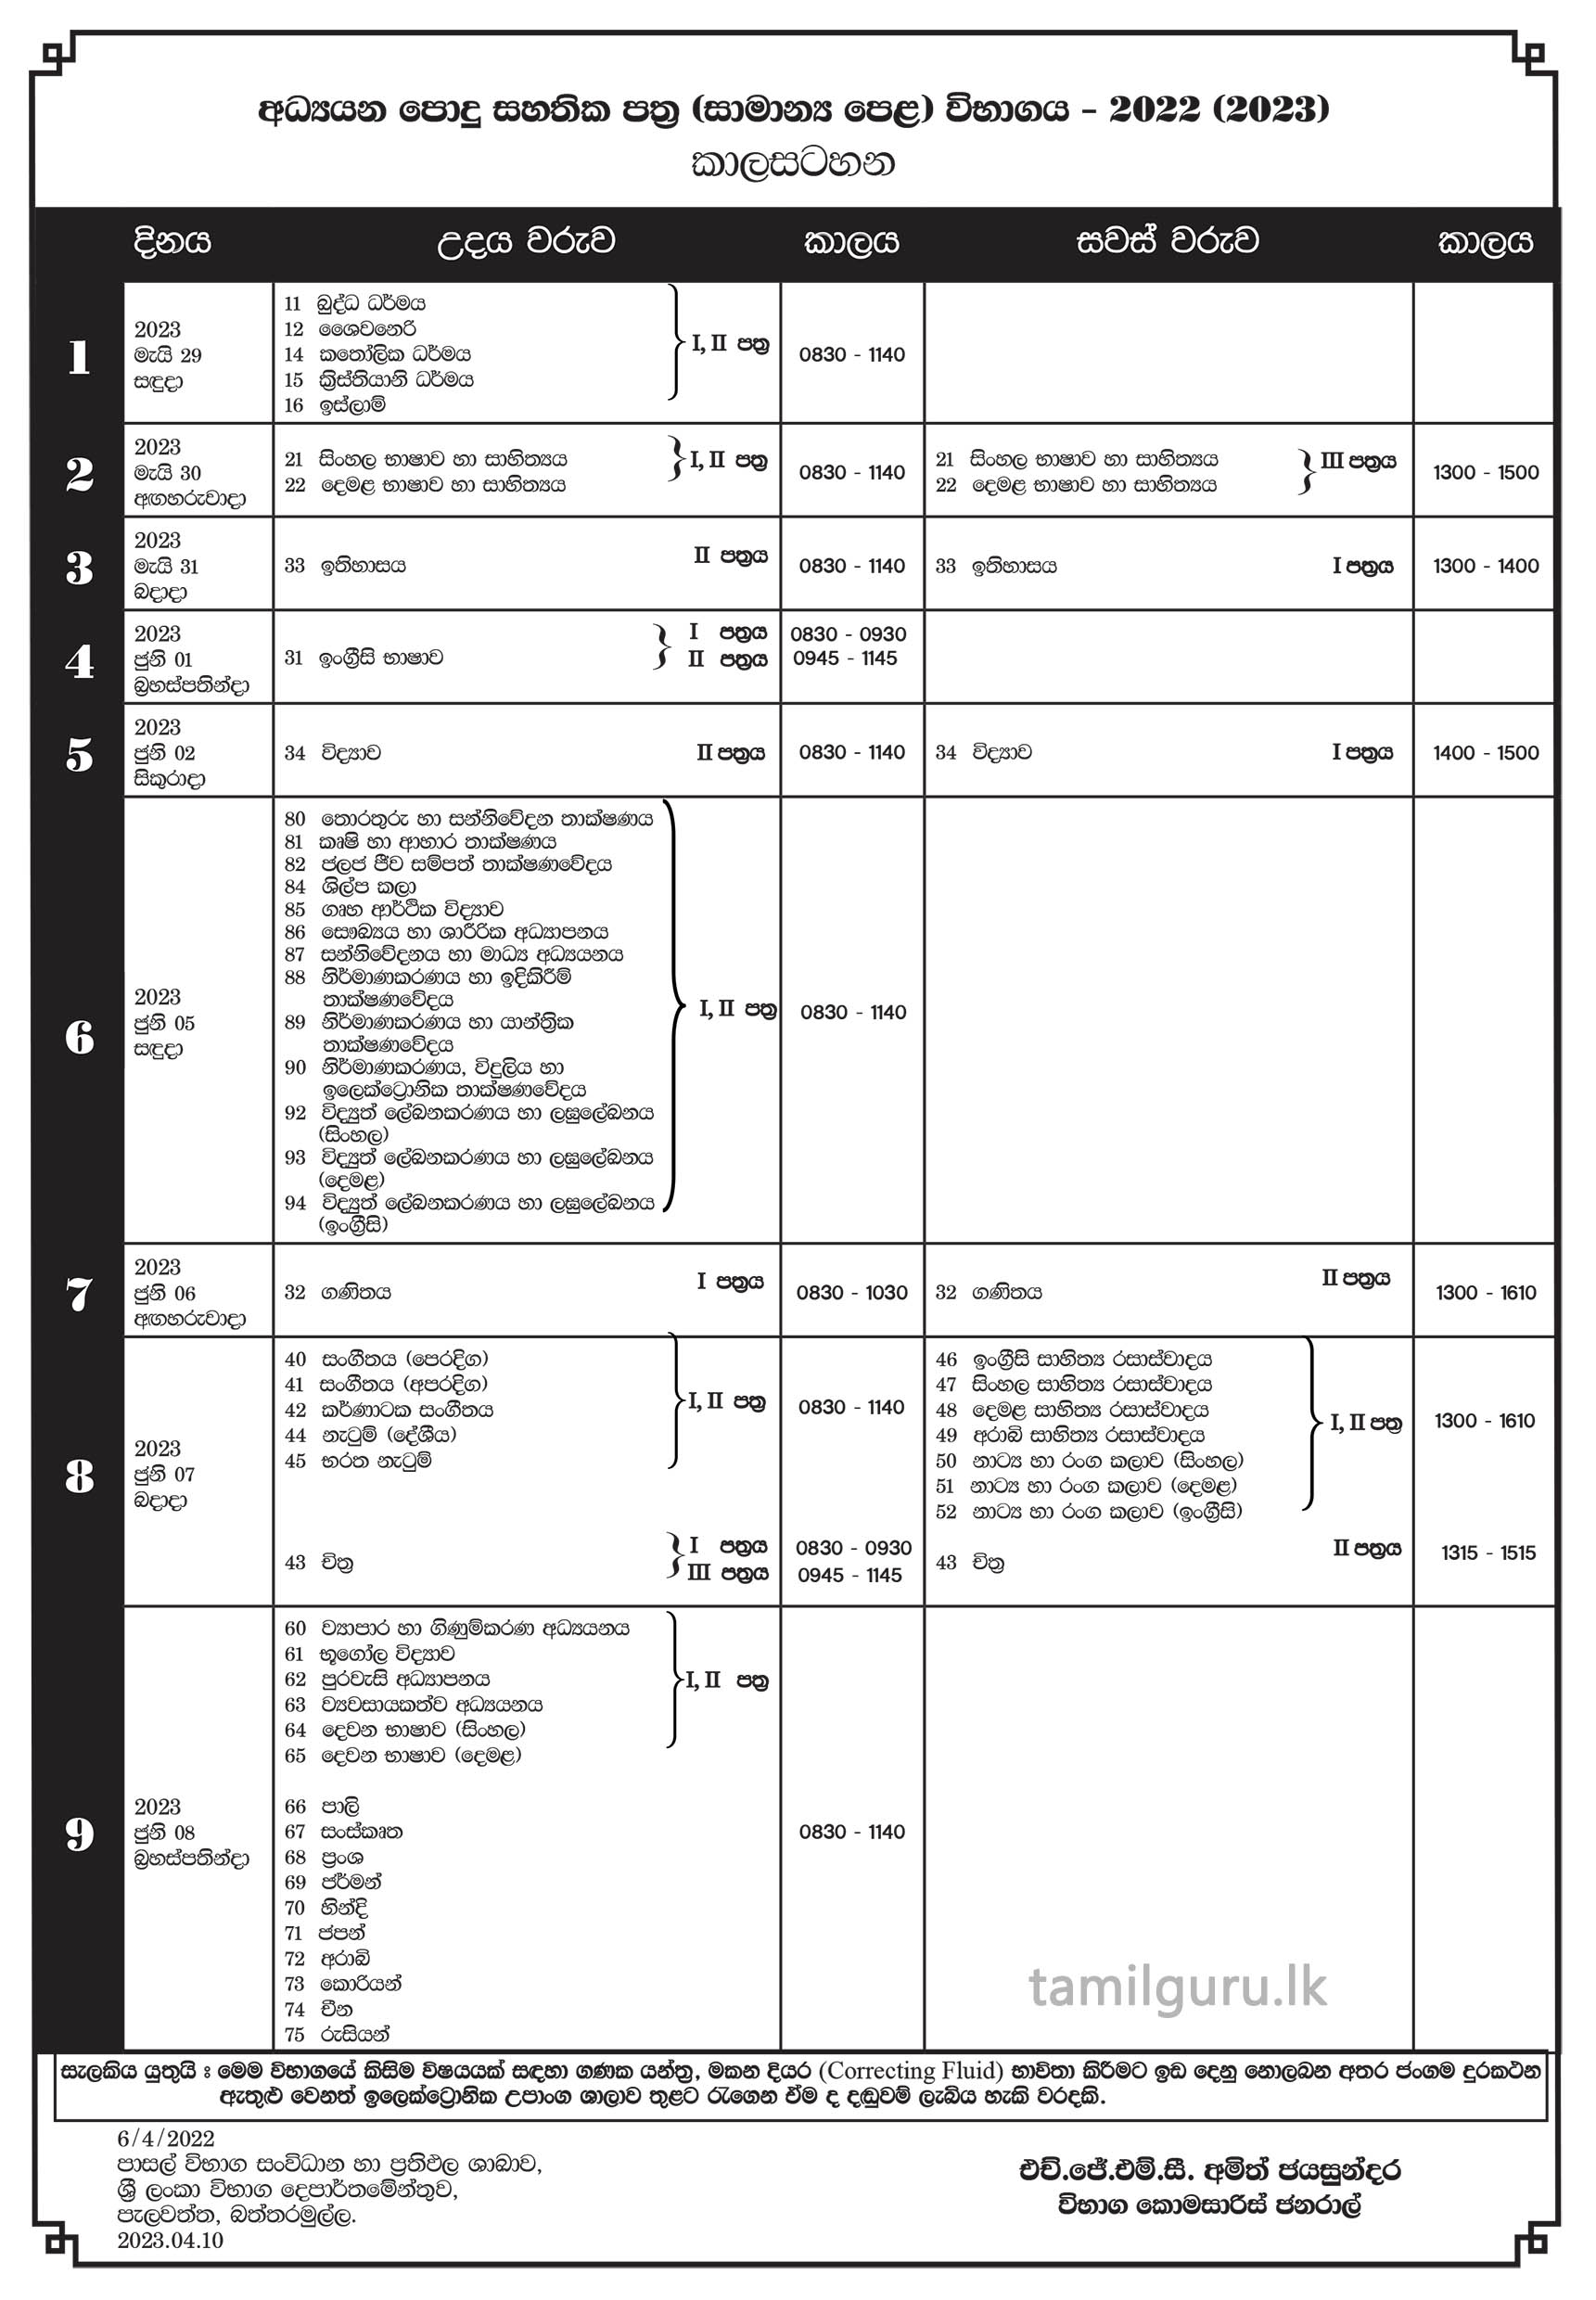 G.C.E. O/L Examination Time Table 2022 (2023) - Department of Examinations